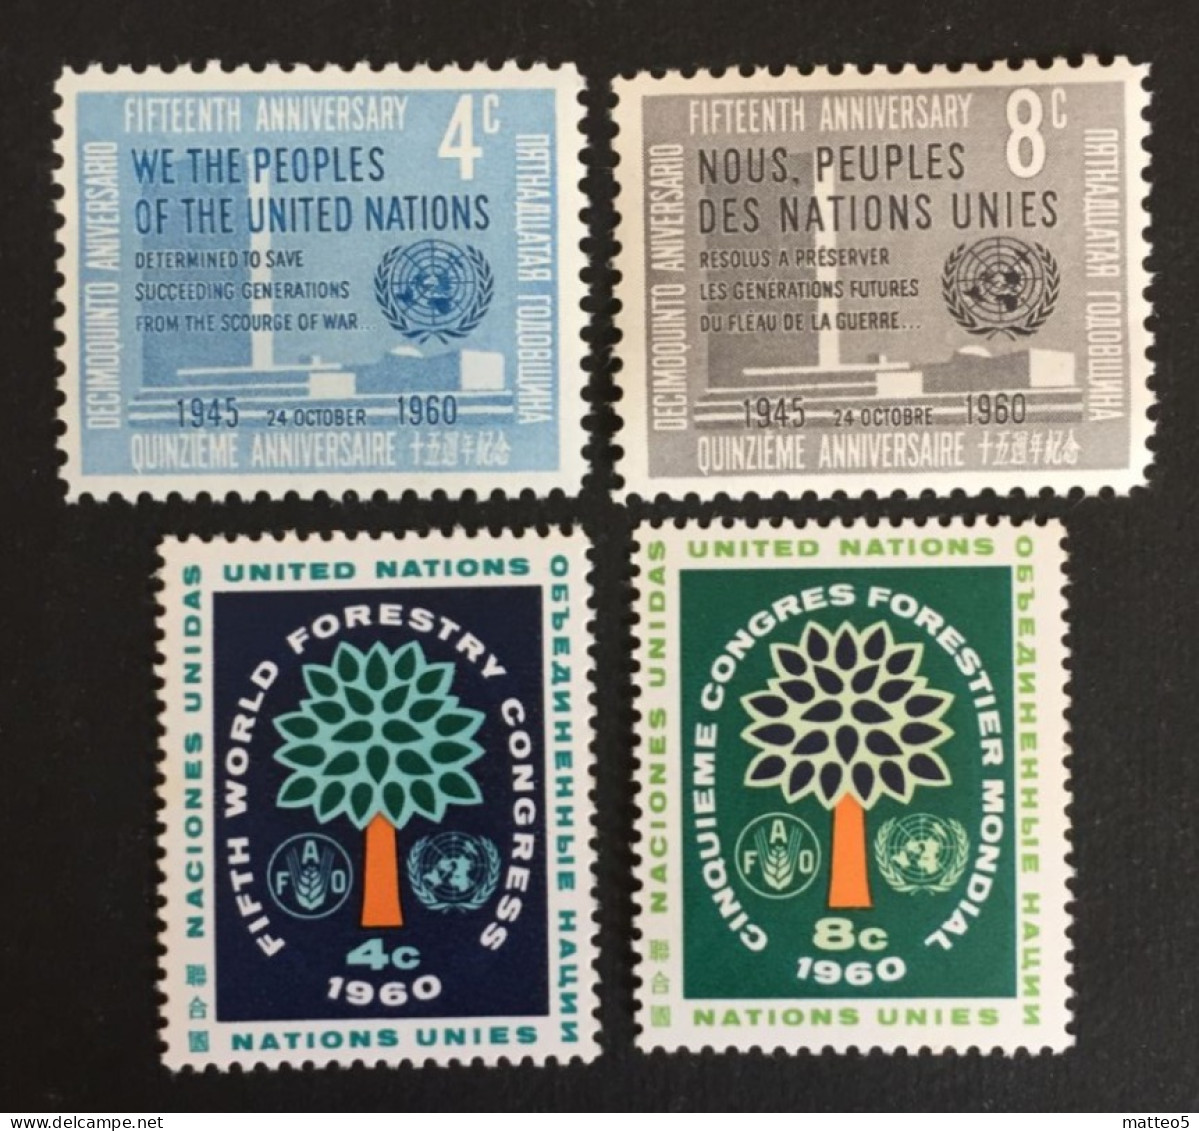 1960 - United Nations UNO UN ONU - World Forestry Congress And UN 15th Anniversary ( We The People) -  Unused - Unused Stamps